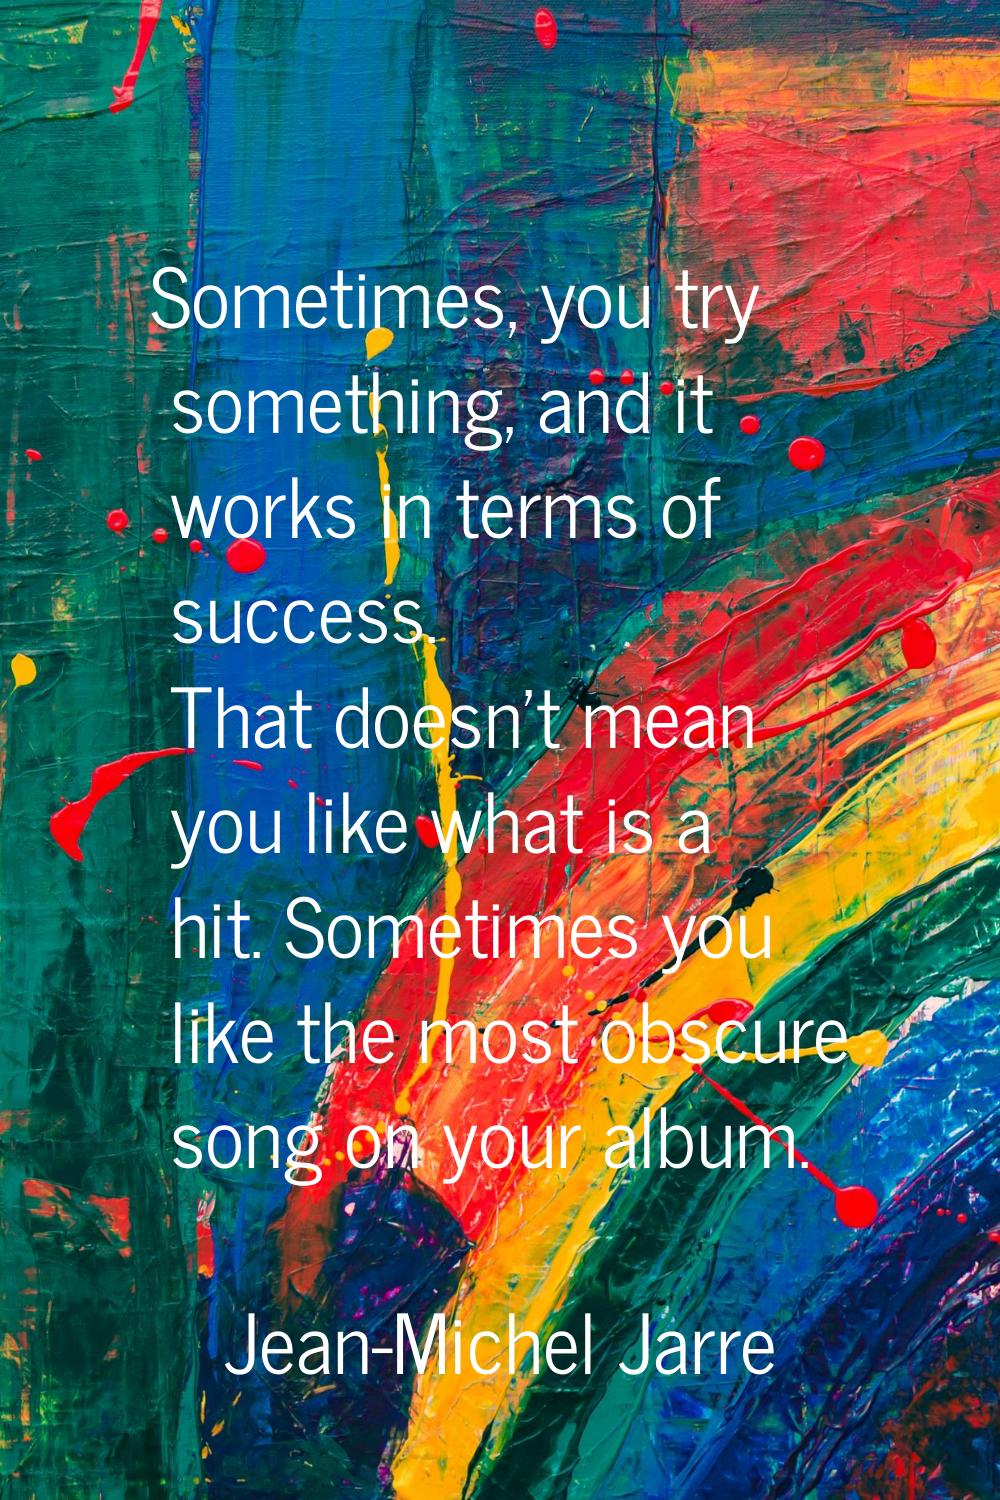 Sometimes, you try something, and it works in terms of success. That doesn't mean you like what is 